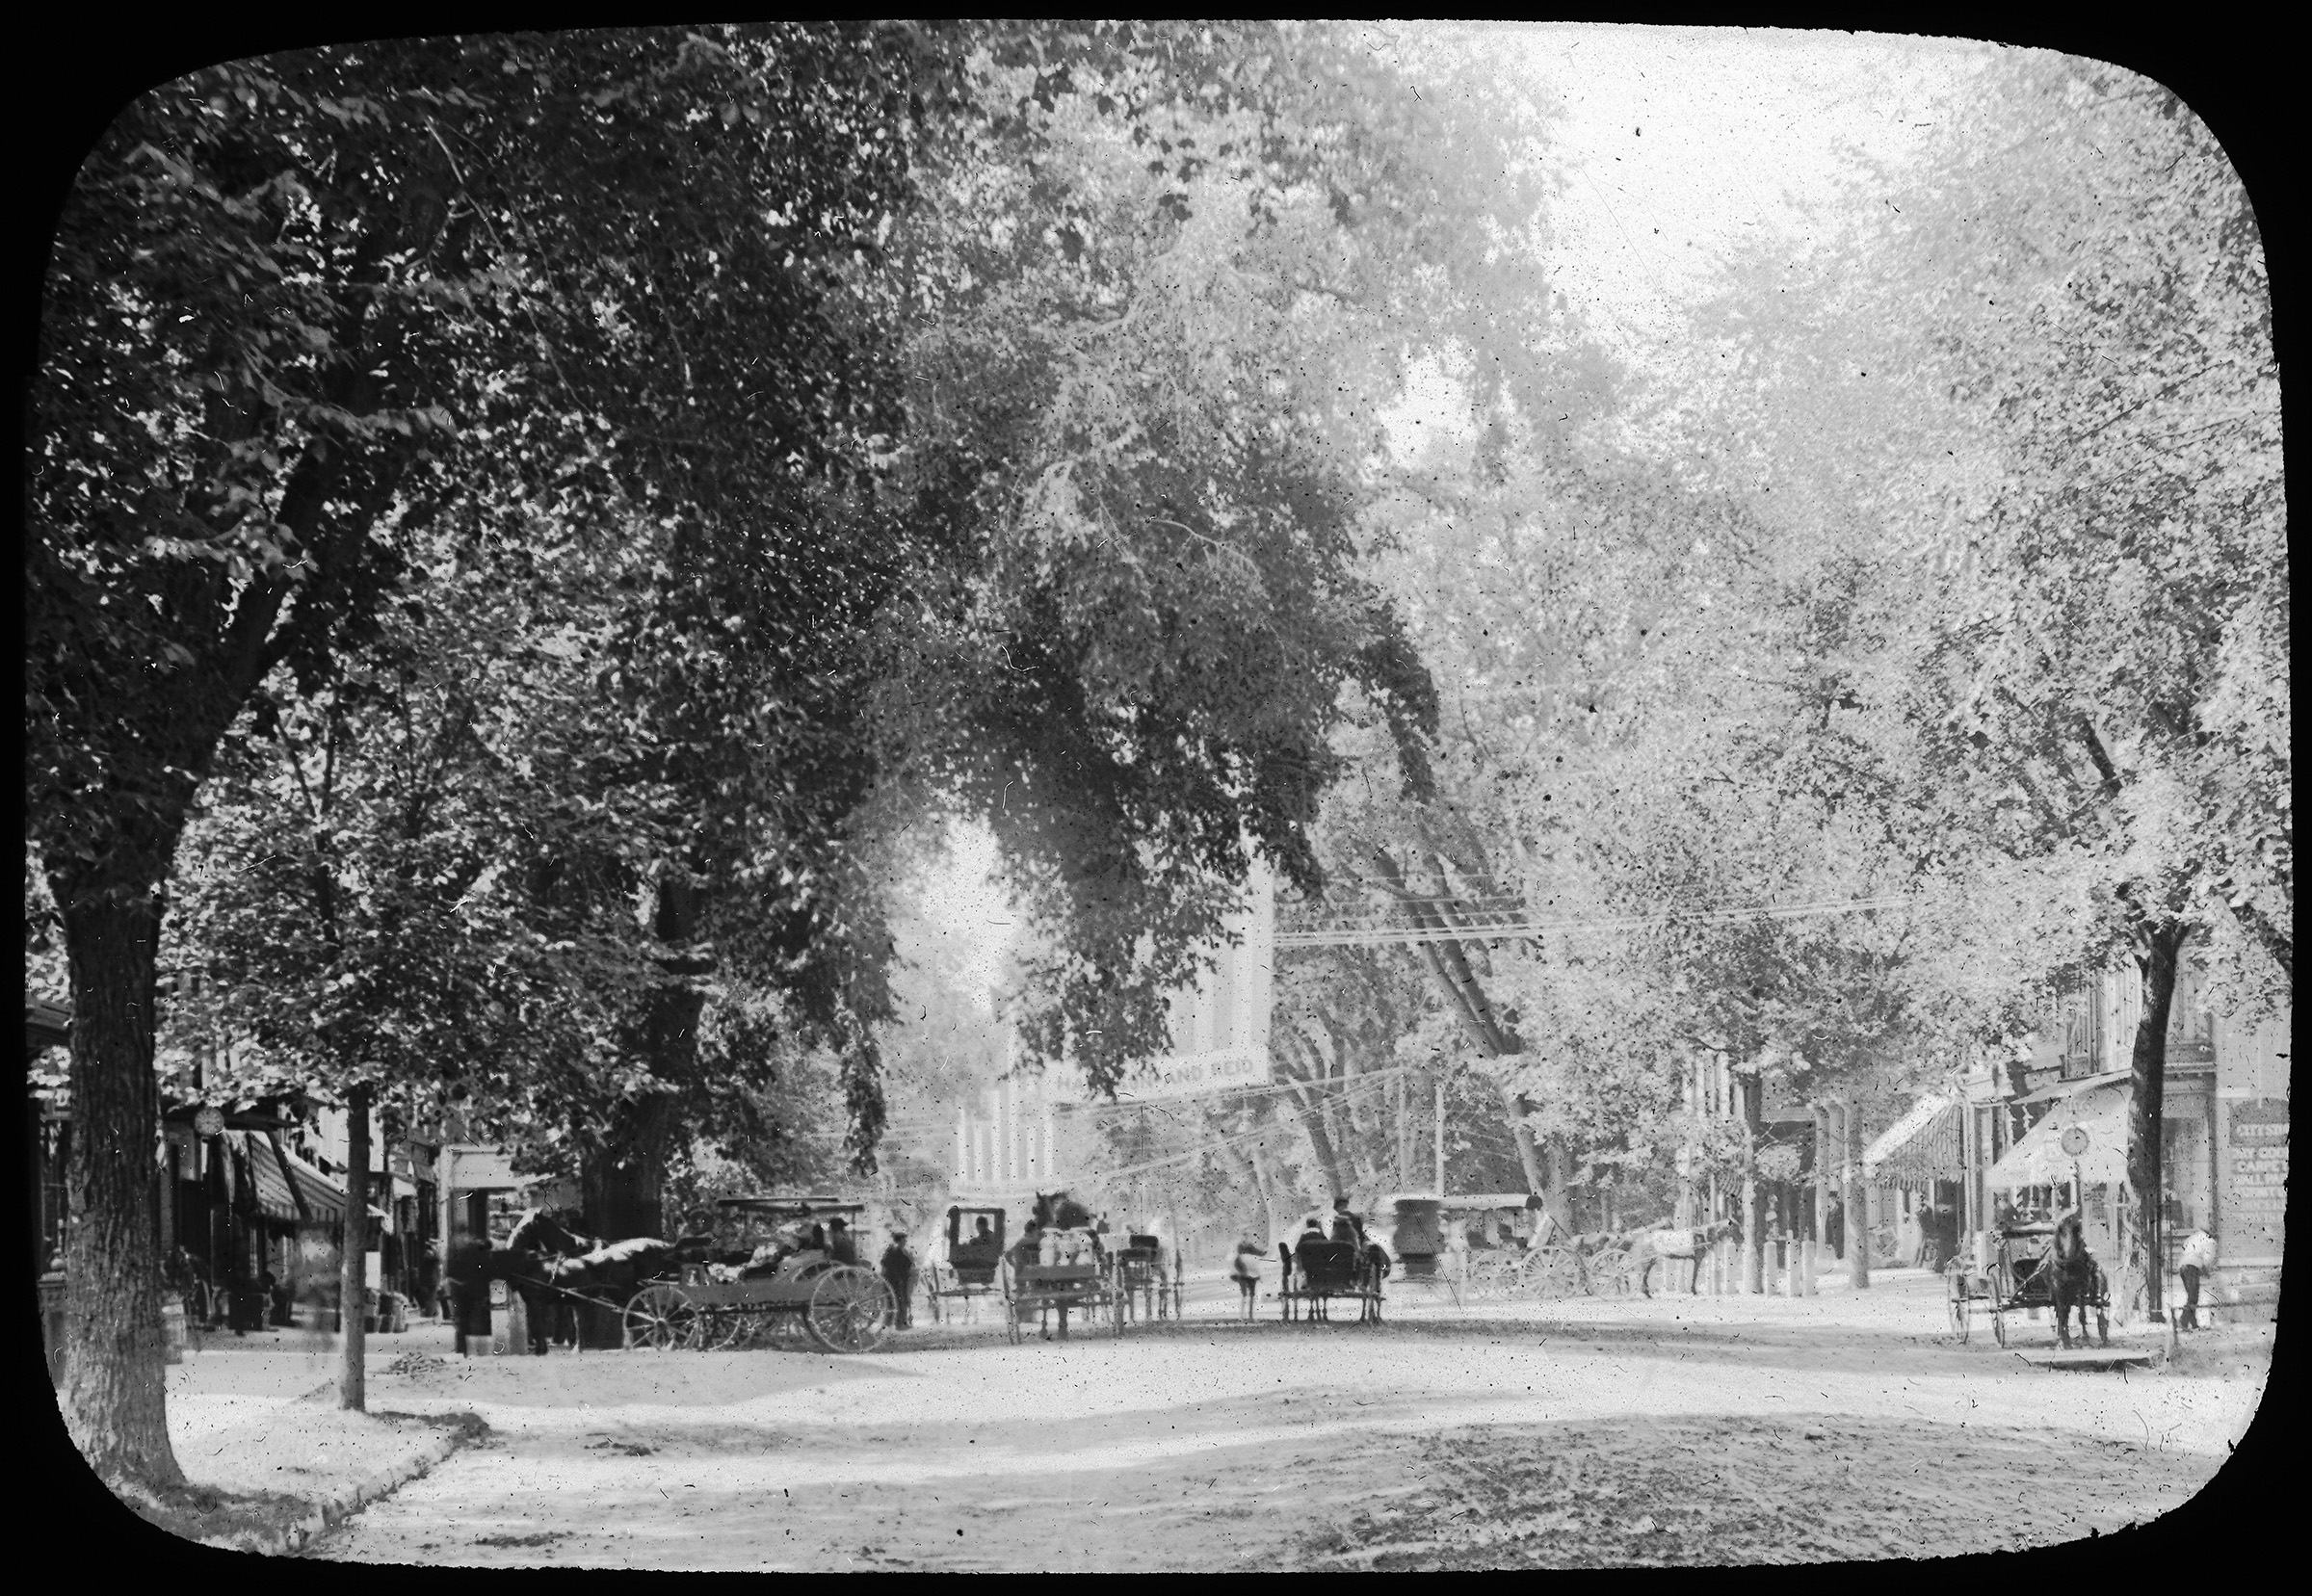 Great Barrington's Main Street in the Nineteenth Century, when it had a classic American streetscape of mature street trees forming a canopy over the space.